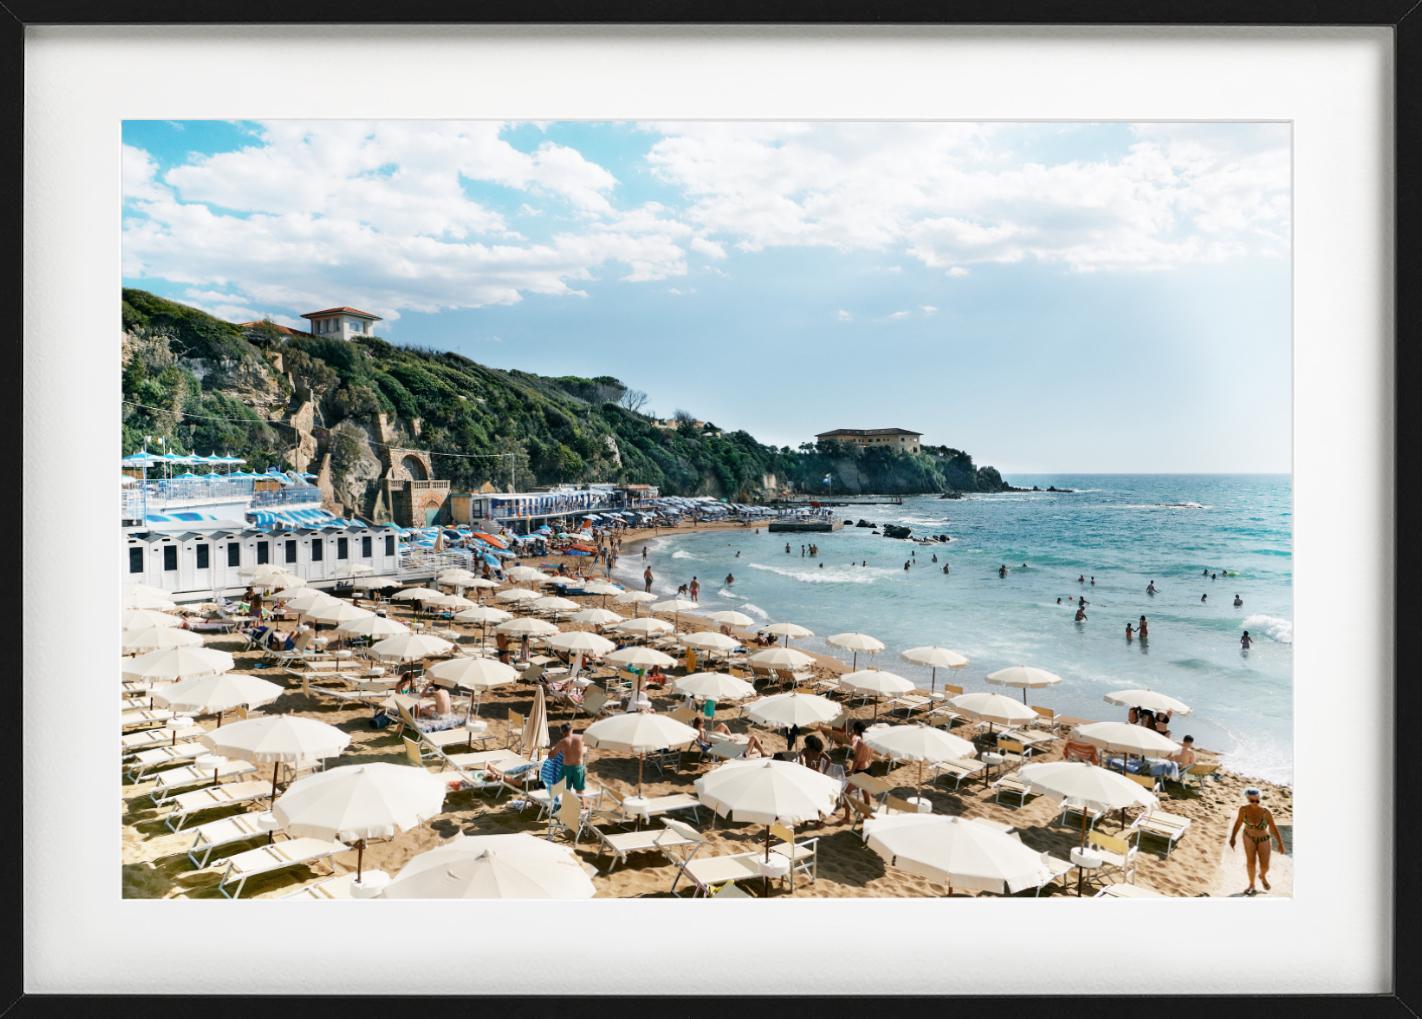 Quercetano Italy Uno- Beach and Sea View with Umbrellas, People, and Mountains - Contemporary Photograph by Florian Innerkofler